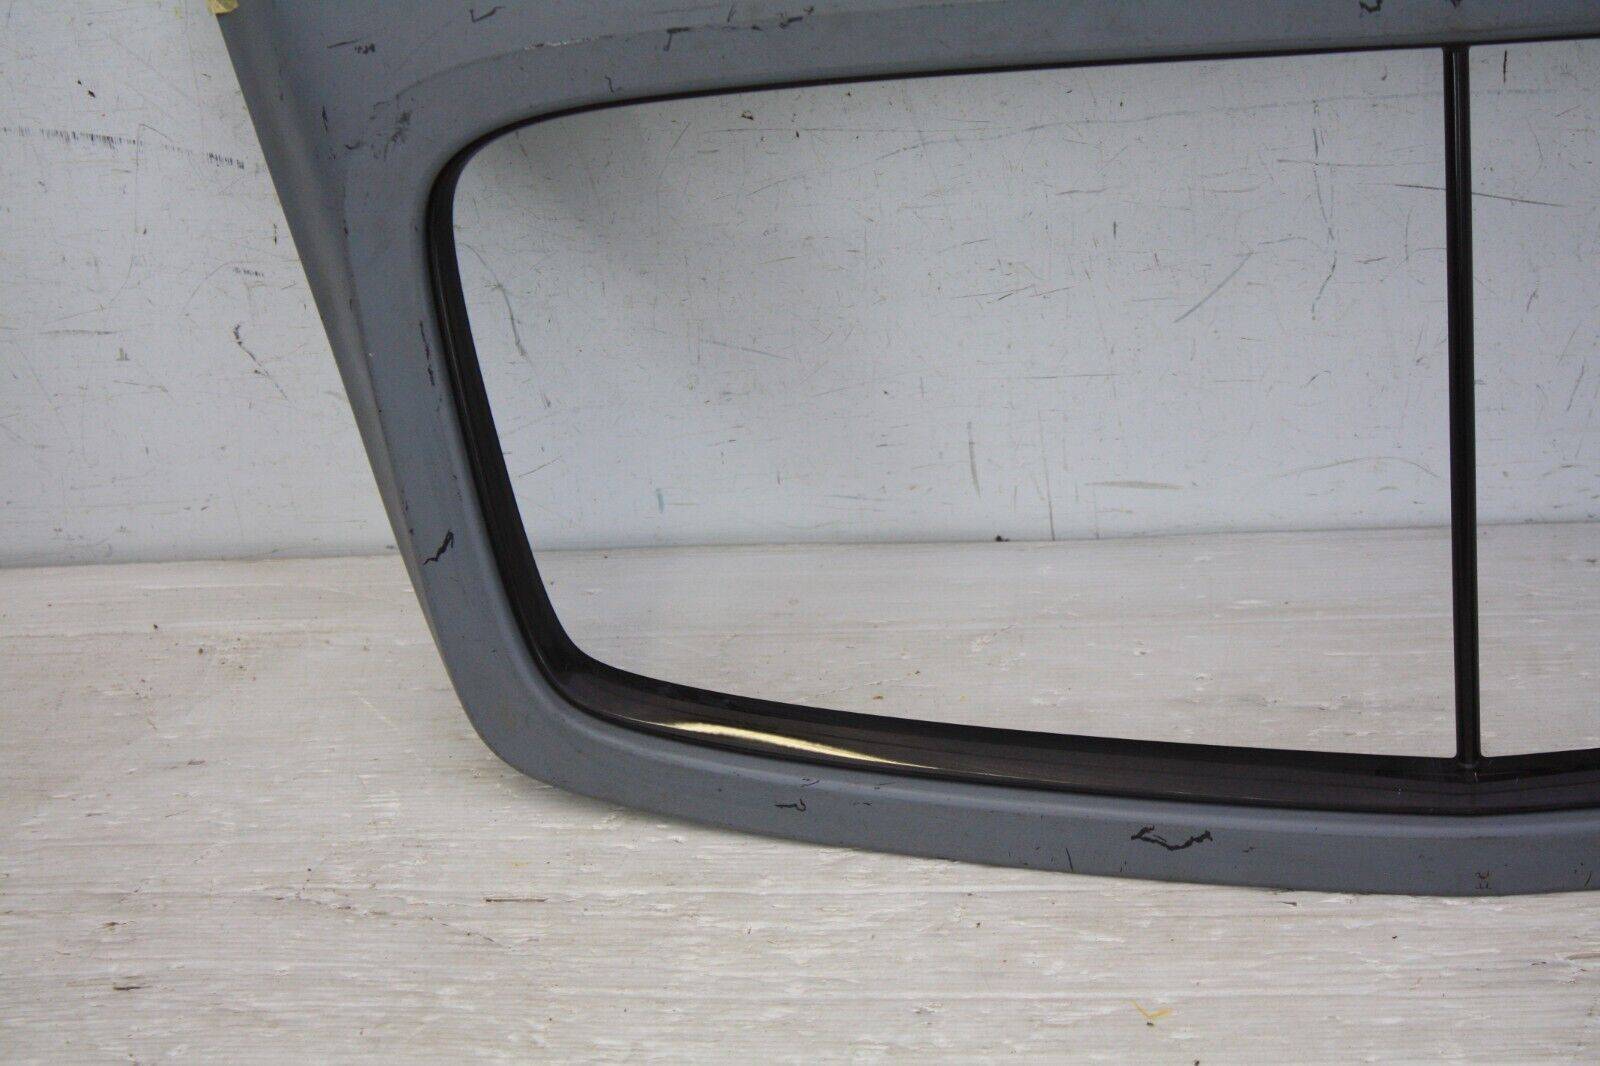 Bentley-Continental-GT-GTC-Supersports-Front-Grill-Surround-3W0853653E-Genuine-175913125810-4